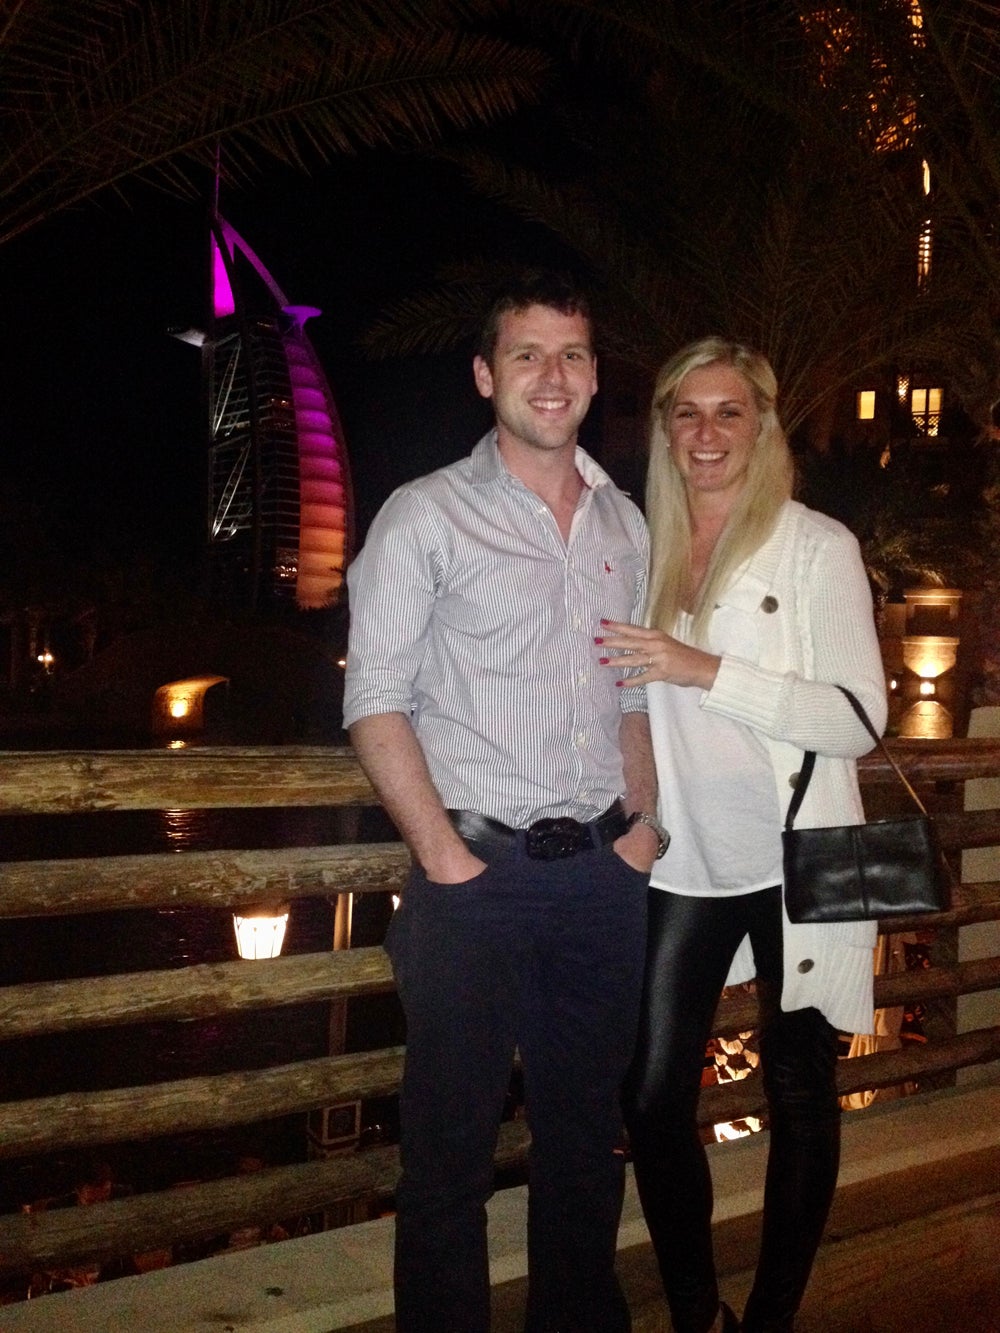 Alan proposed to Anneka in Dubai (Collect/PA Real Life)